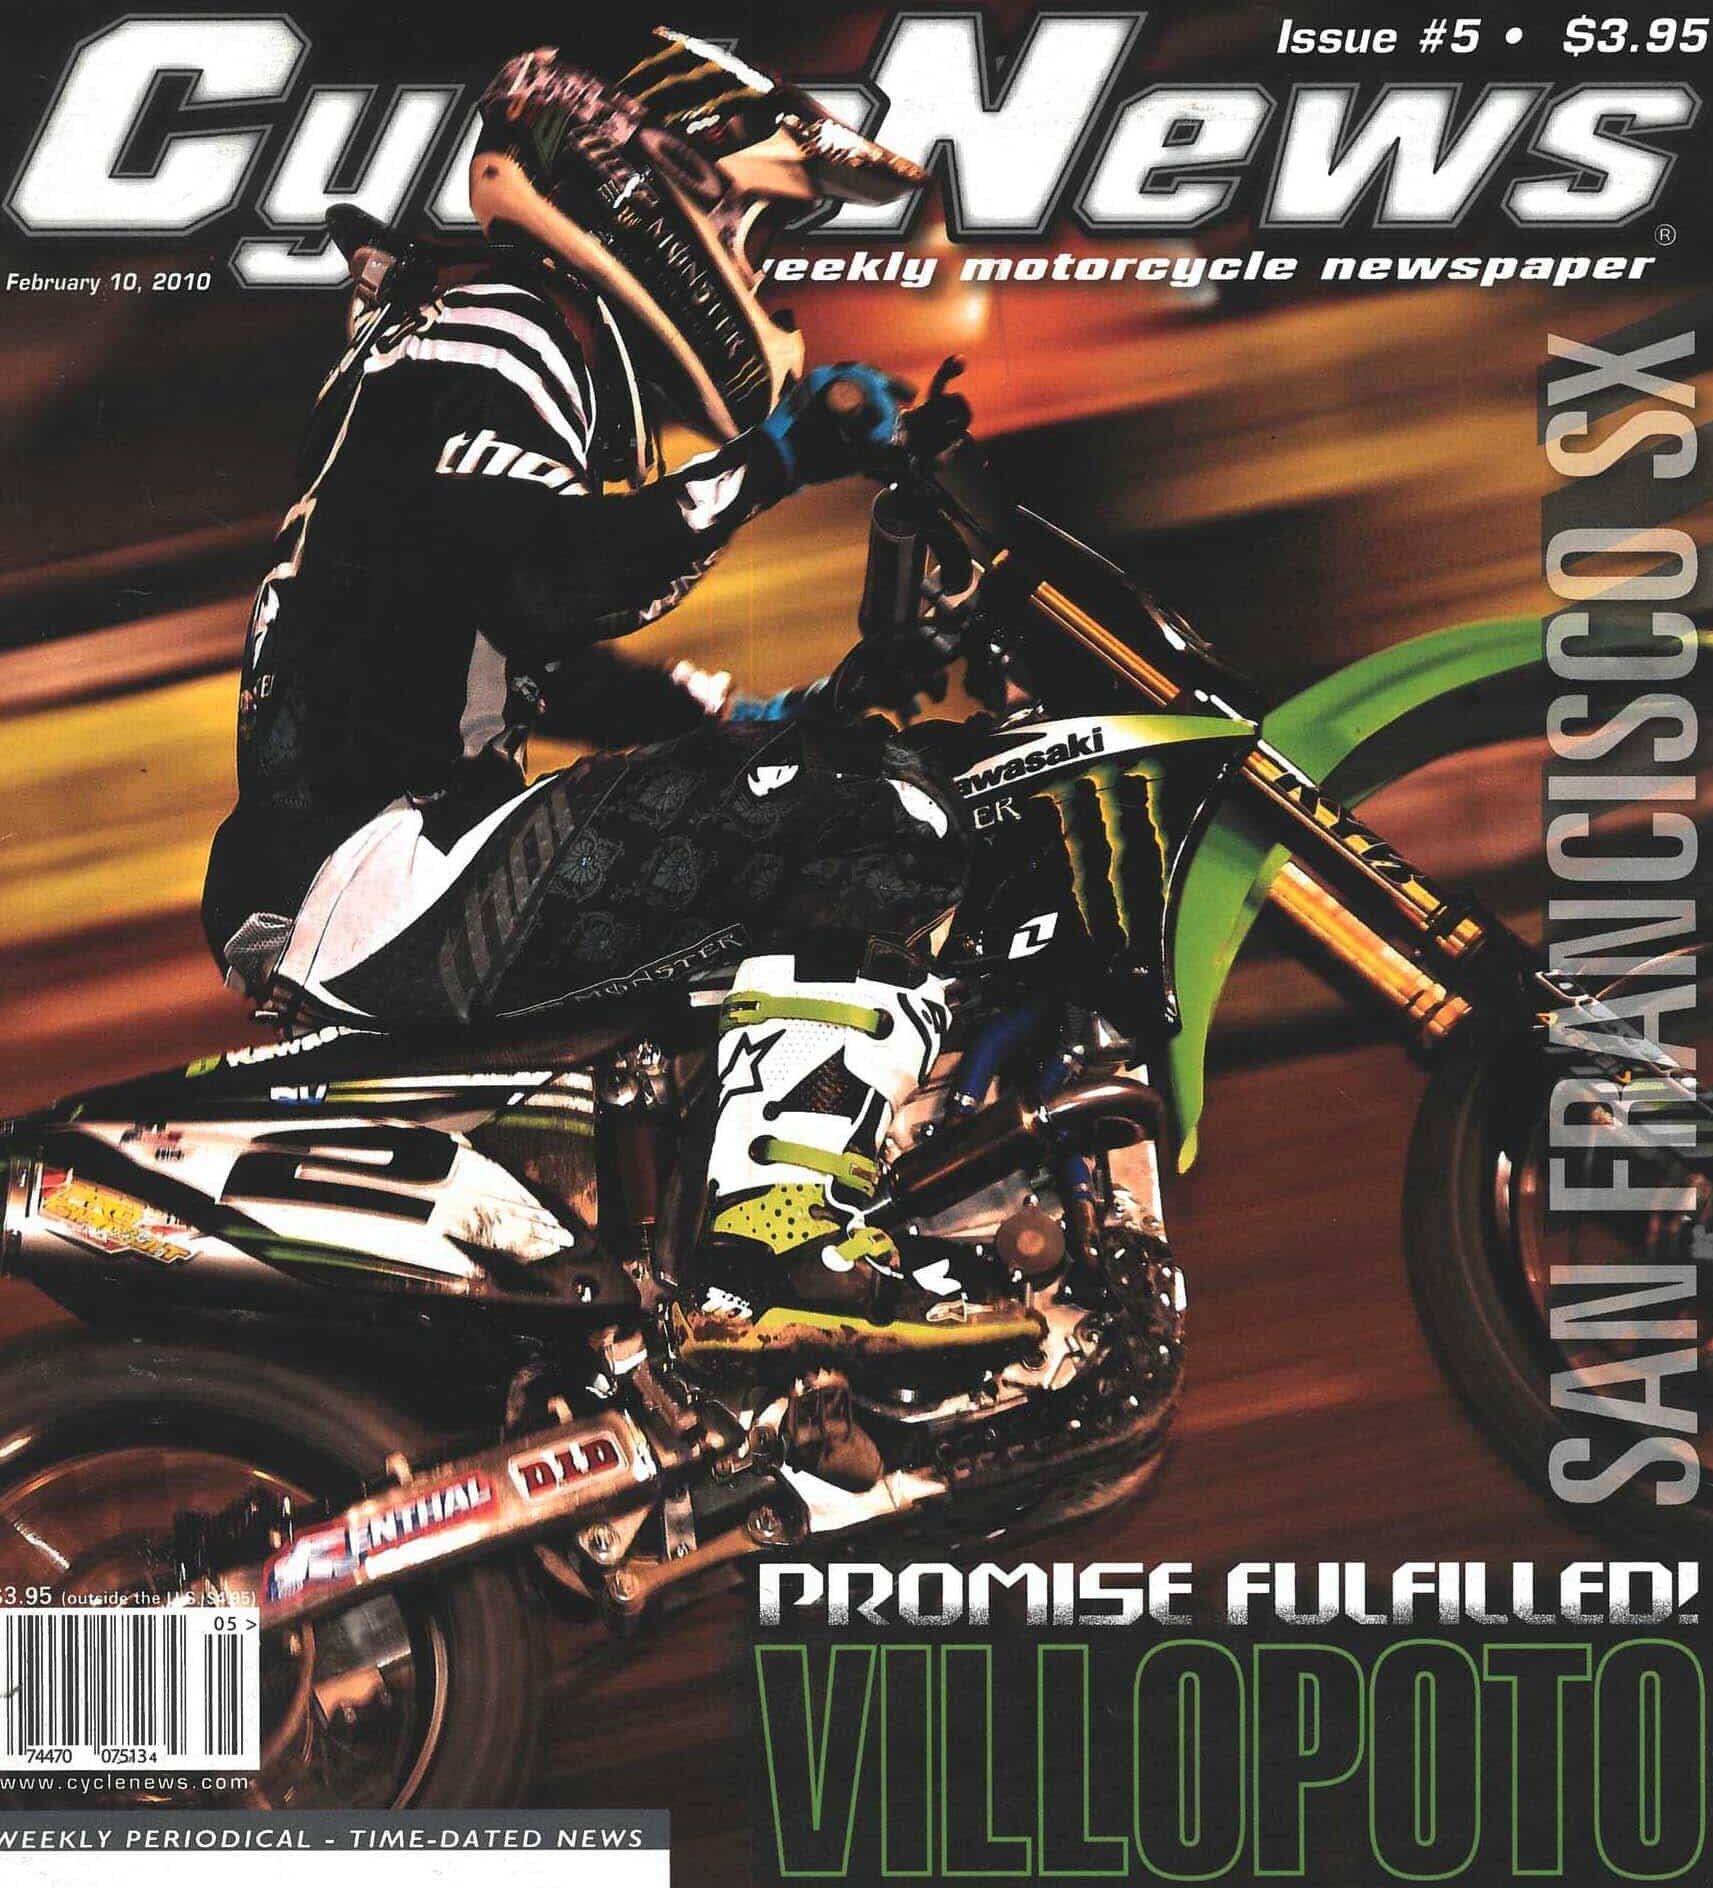 Ryan Villopoto on the cover of Cycle News, 2010